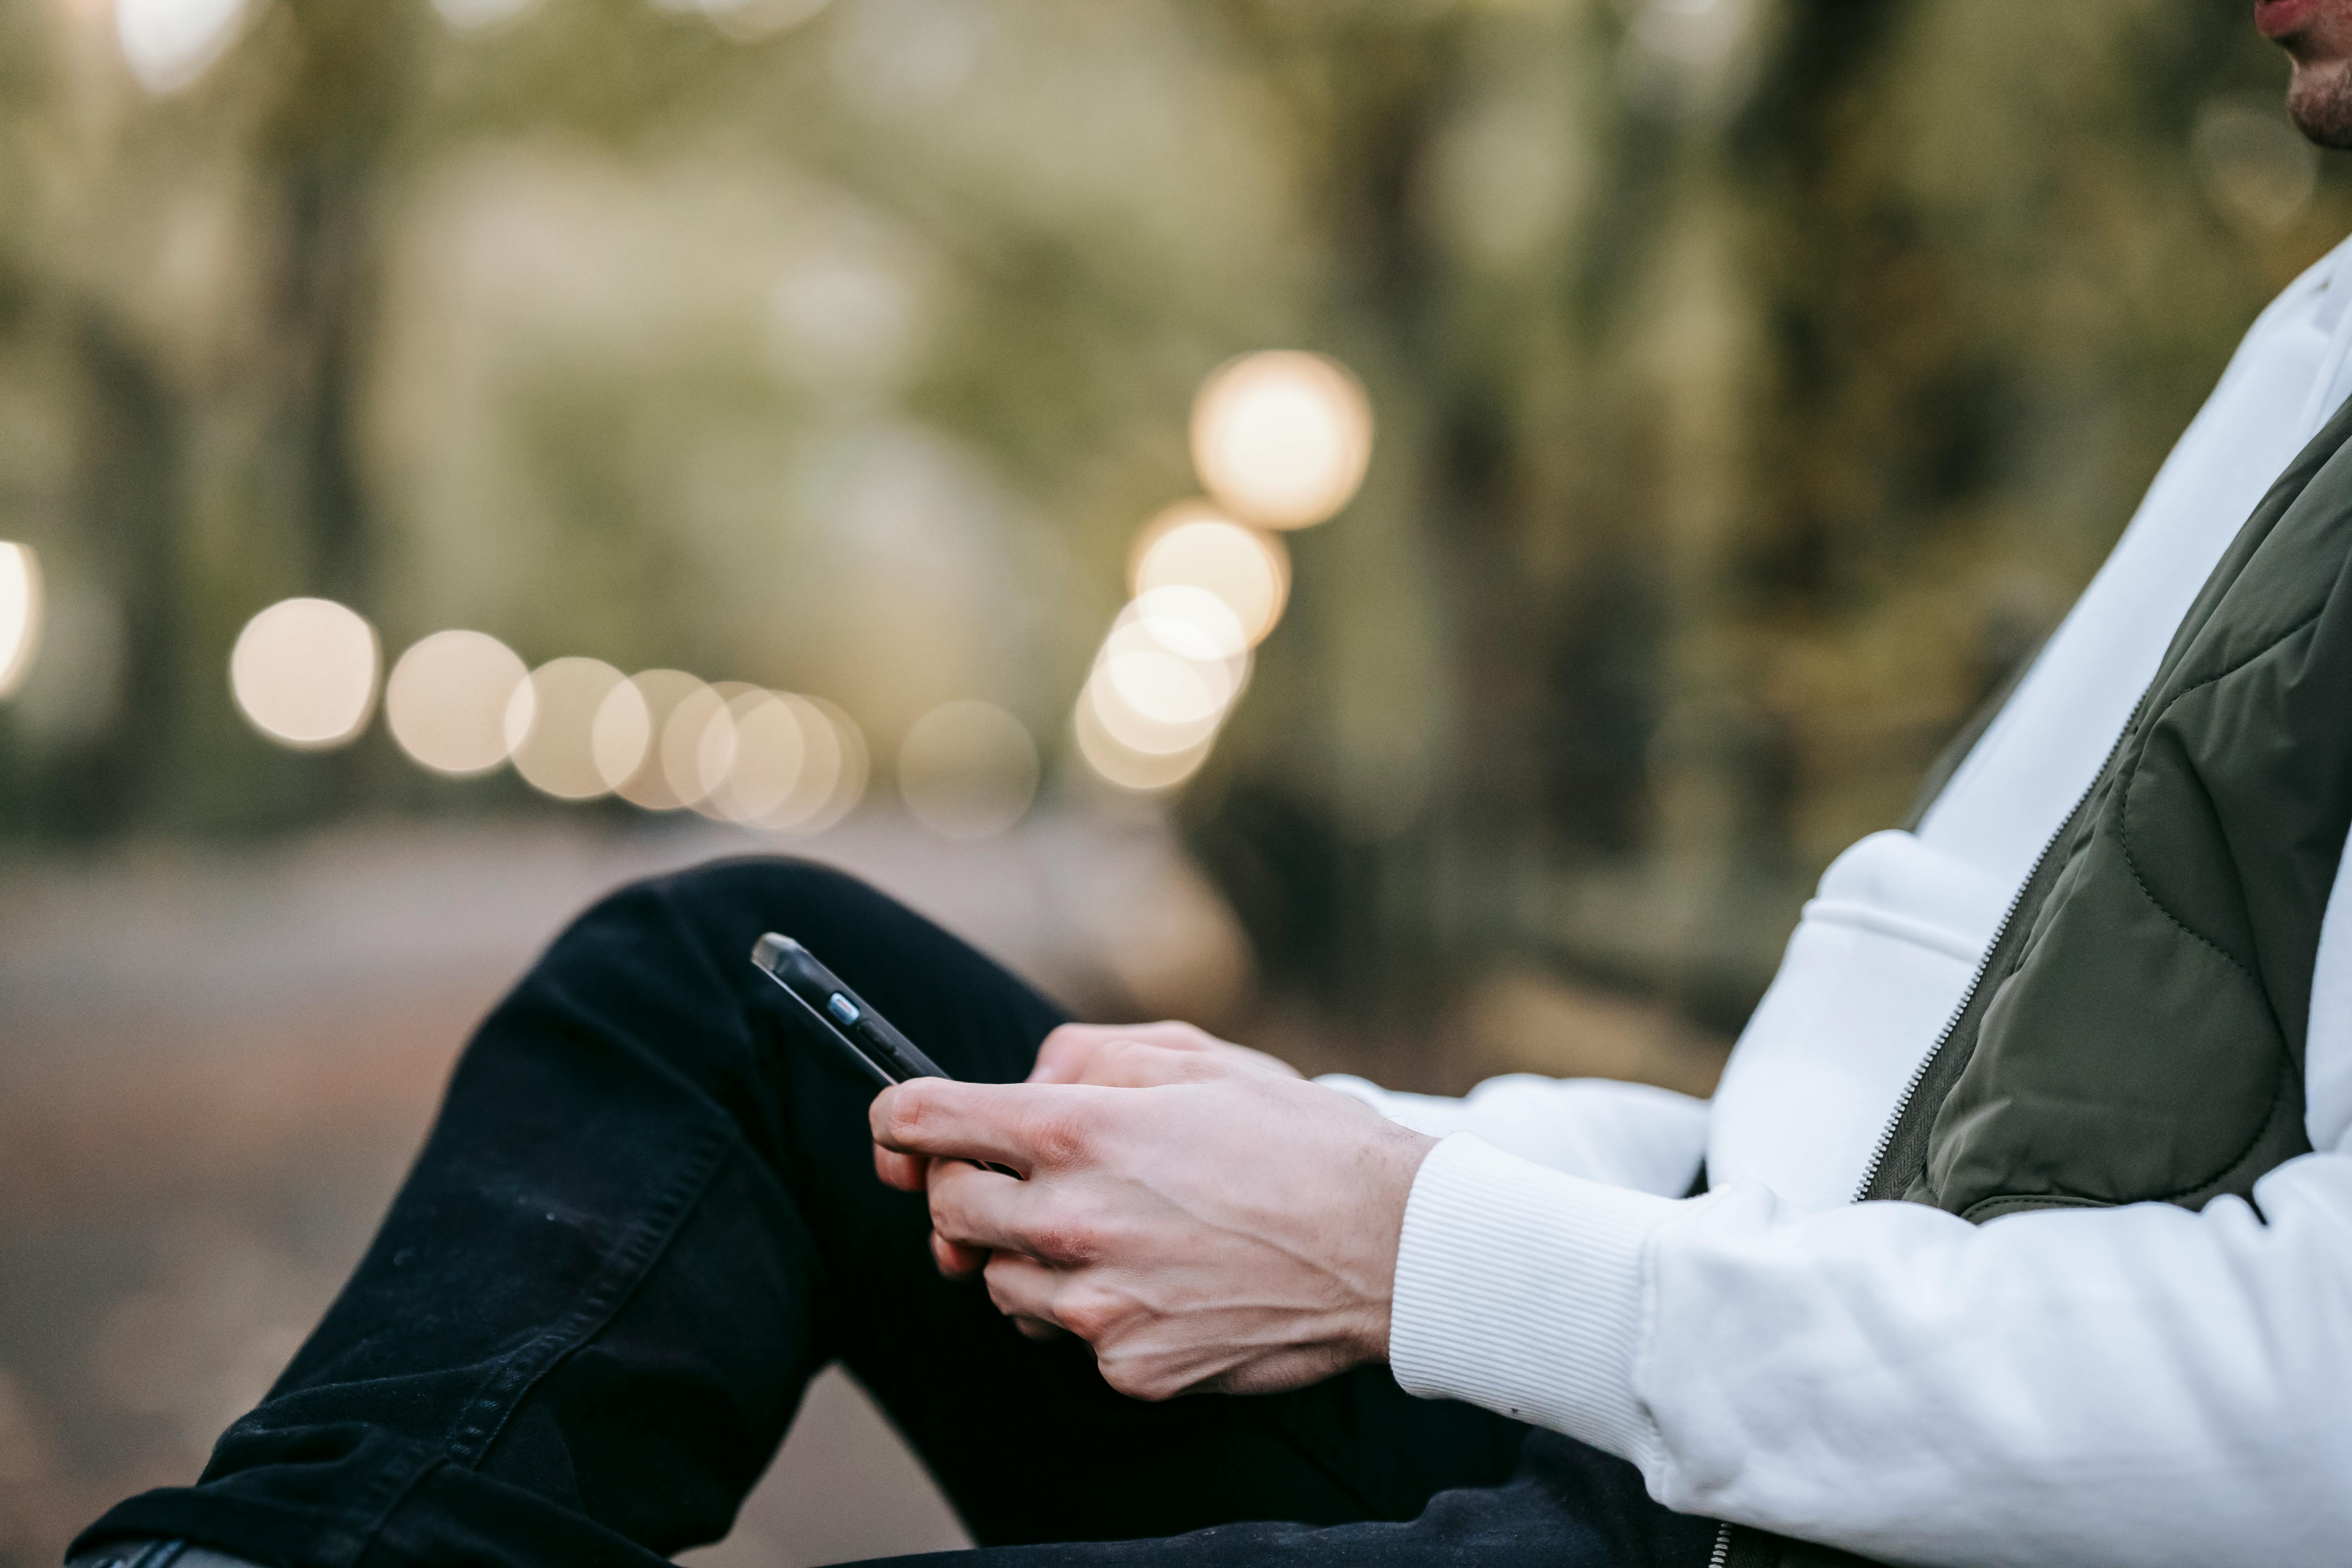 A man sneakily texting | Source: Pexels